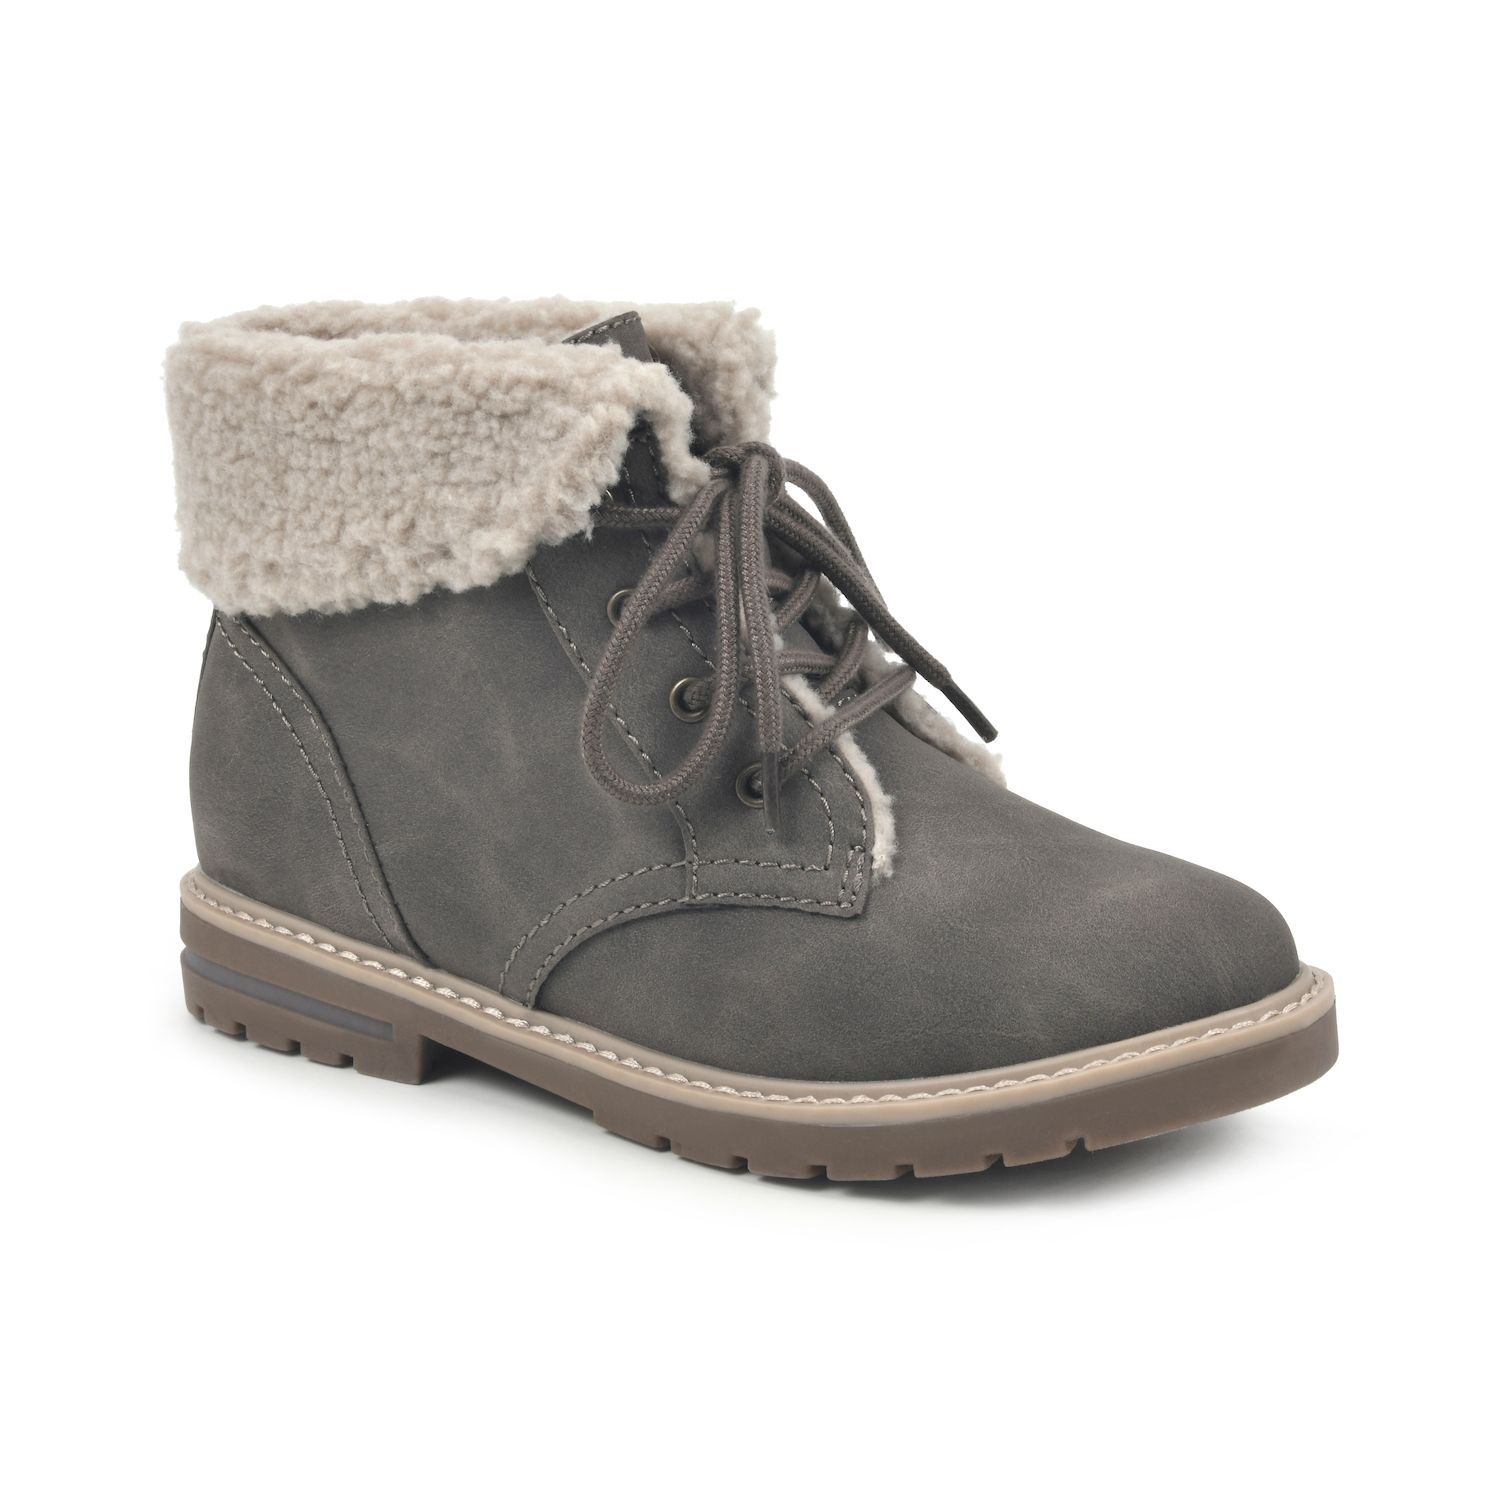 Womens Booties Ankle Boots - Shoes | Kohl's